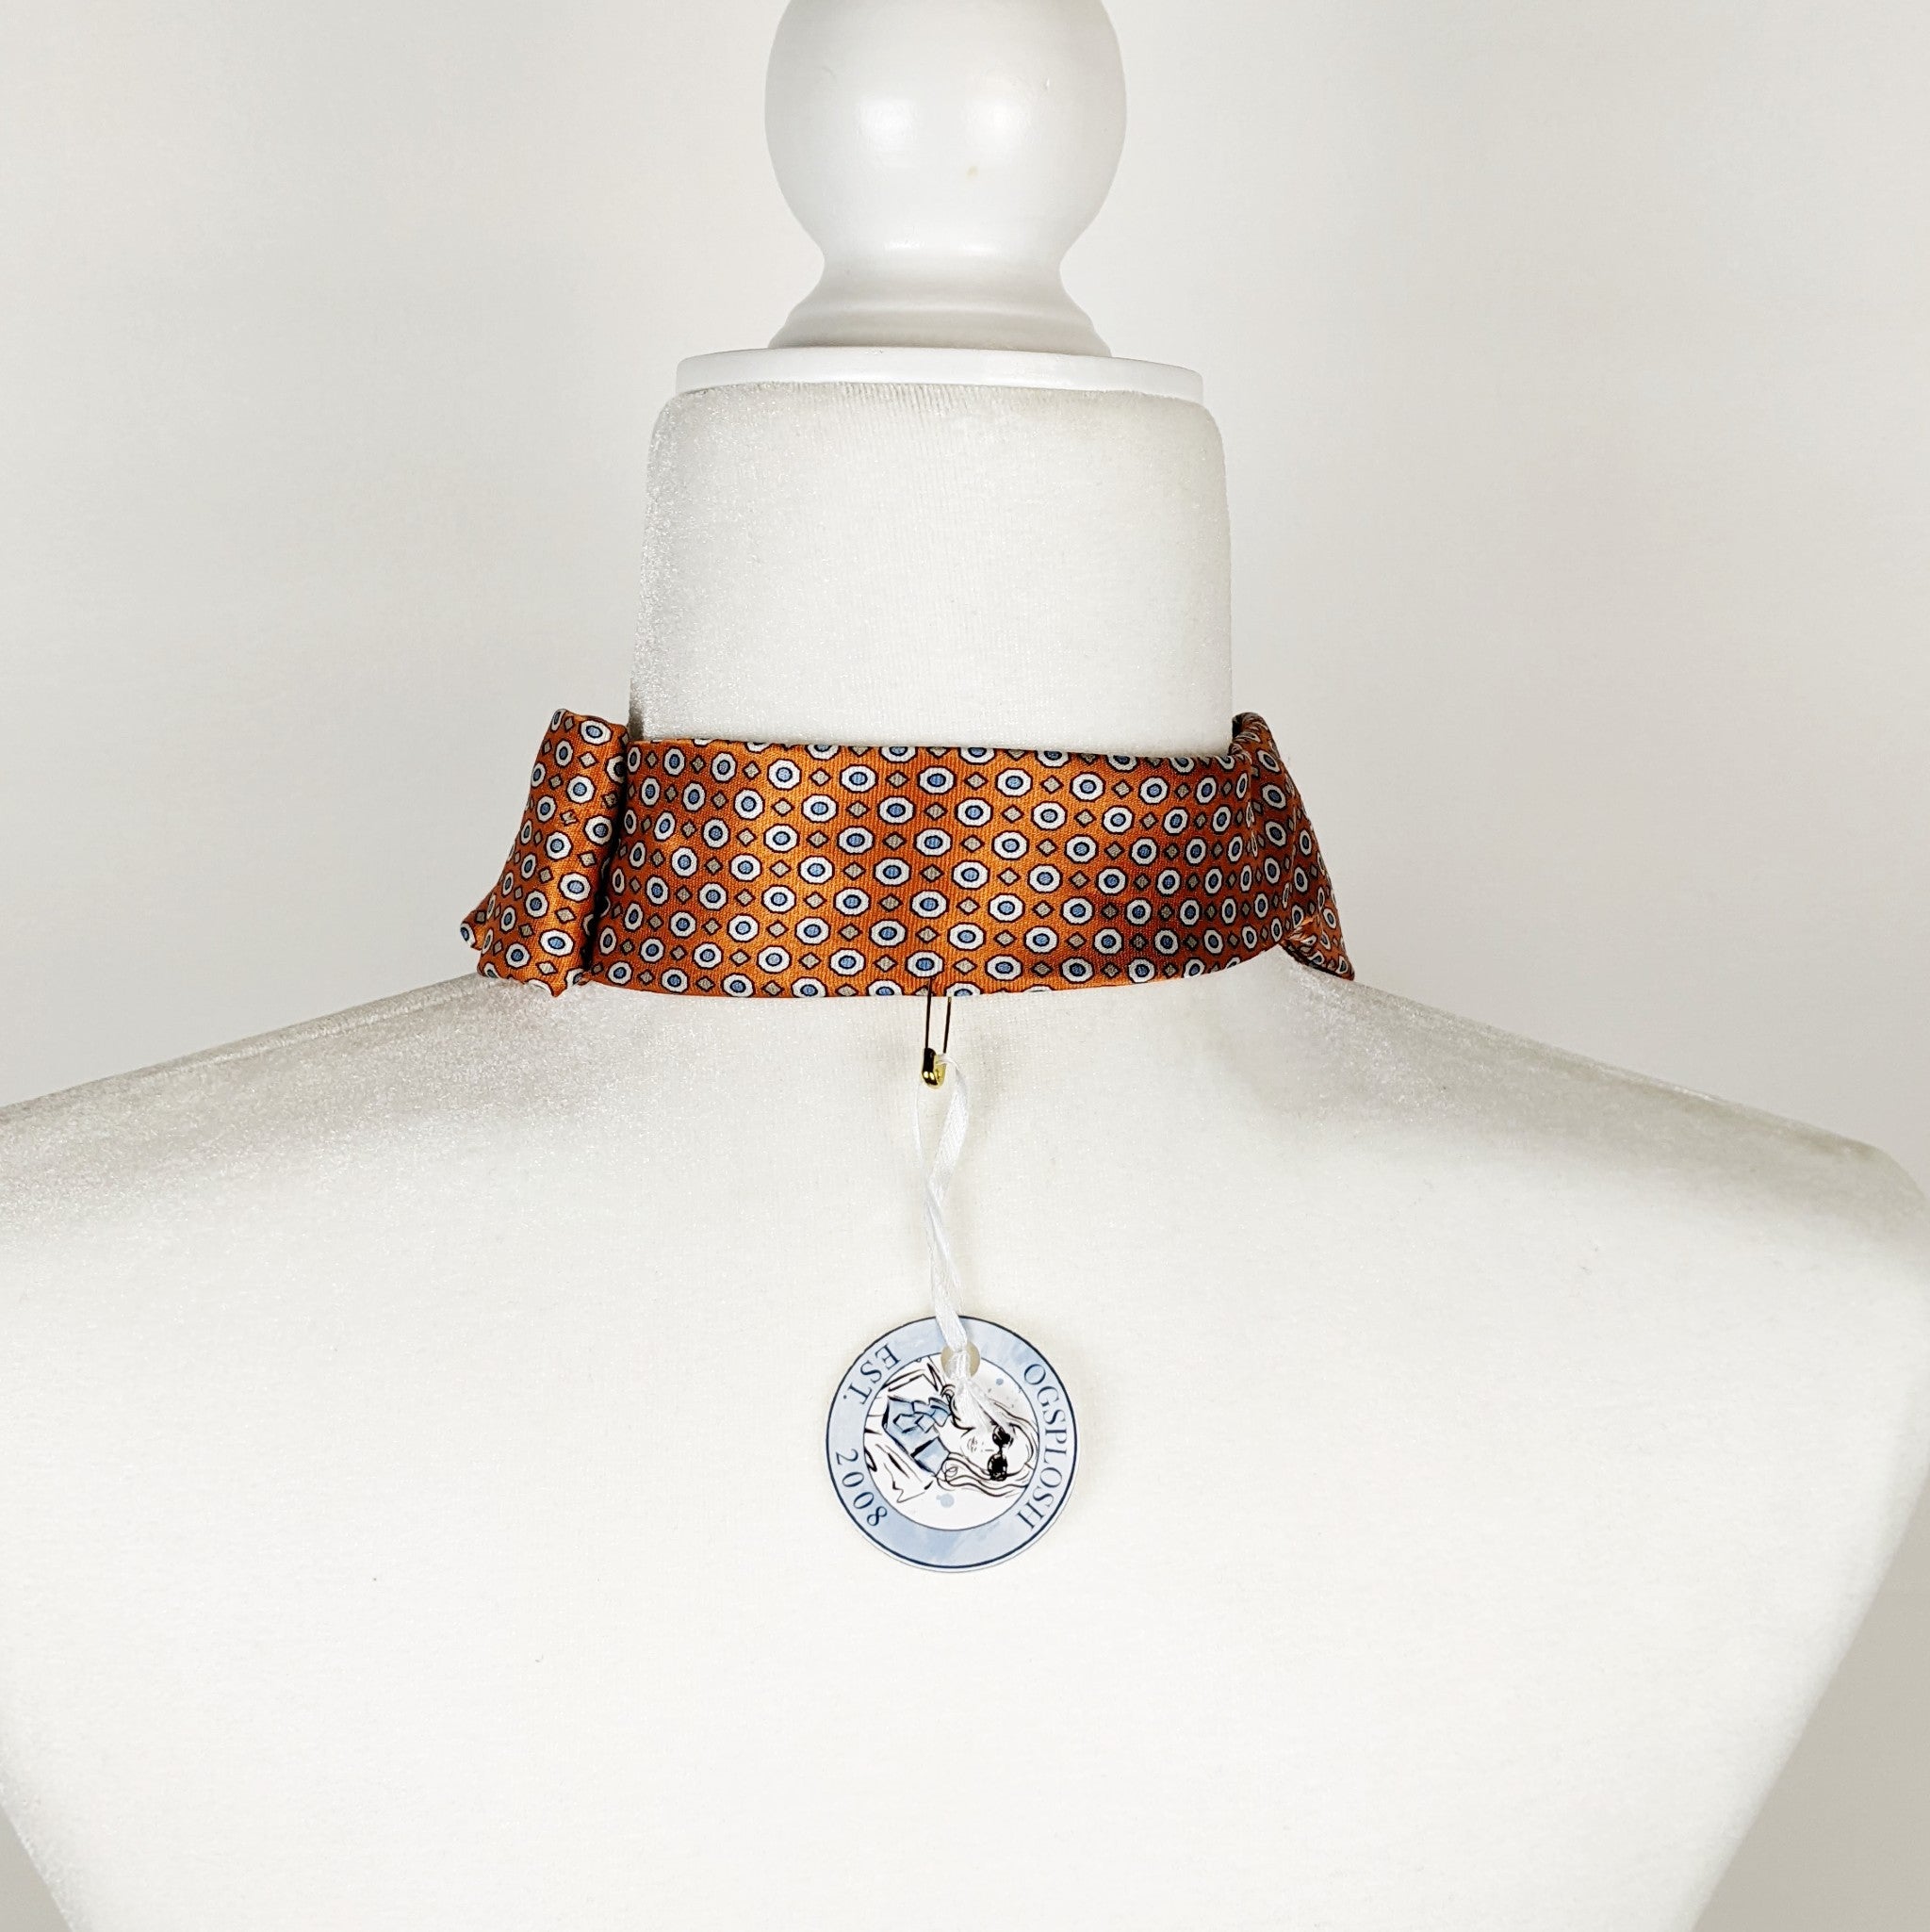 Women's Skinny Ascot In Orange With Blue and White Pin Dots.